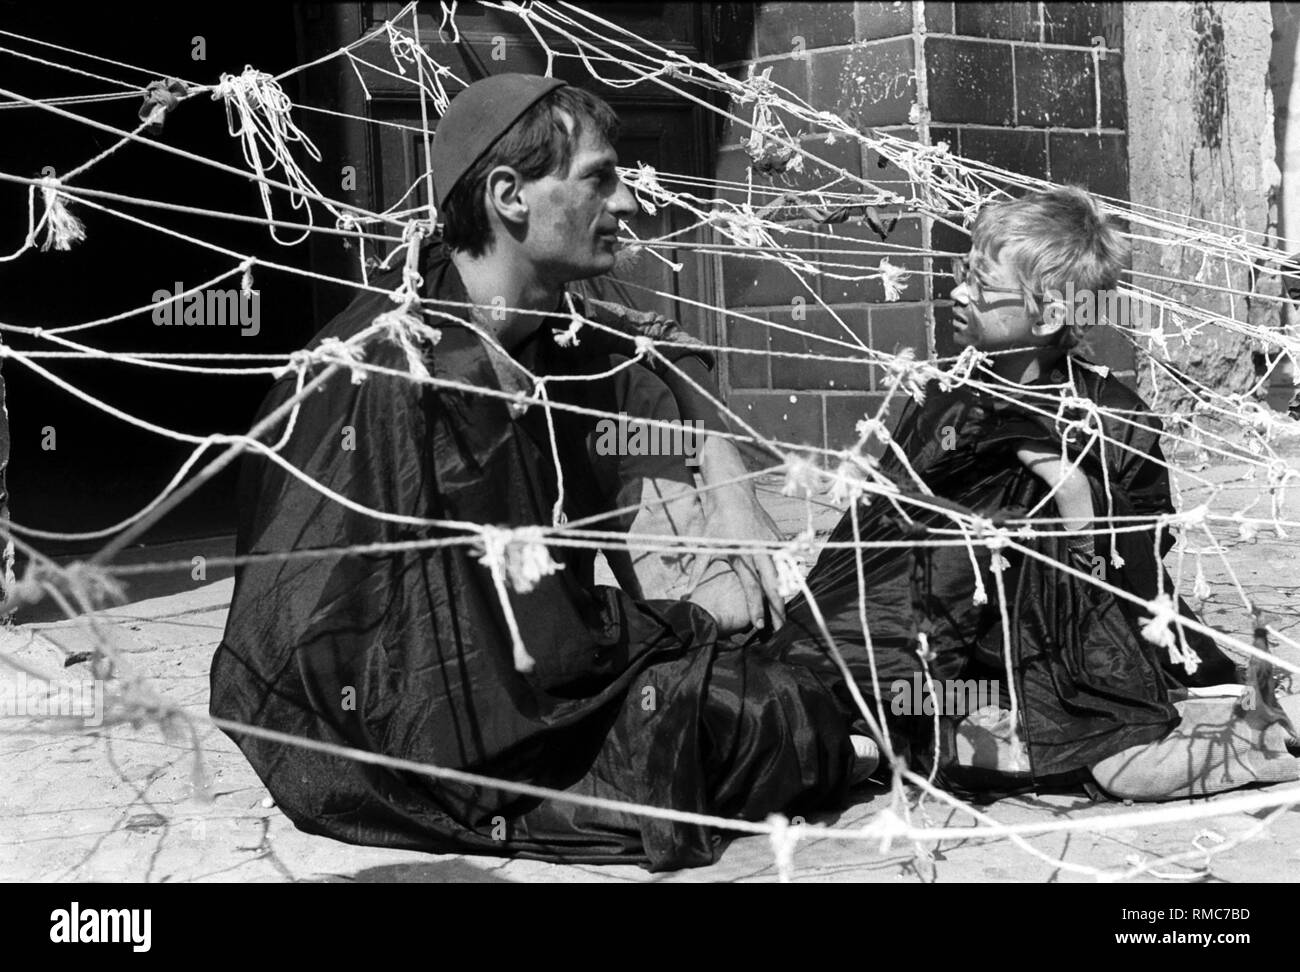 Germany, Berlin, July 11, 1987, the 14th Grammar School in Prenzlauer Berg, a group of people doing fantasy games with children, outside state regulations, Sredzkistrasse, man with child in a net. Stock Photo